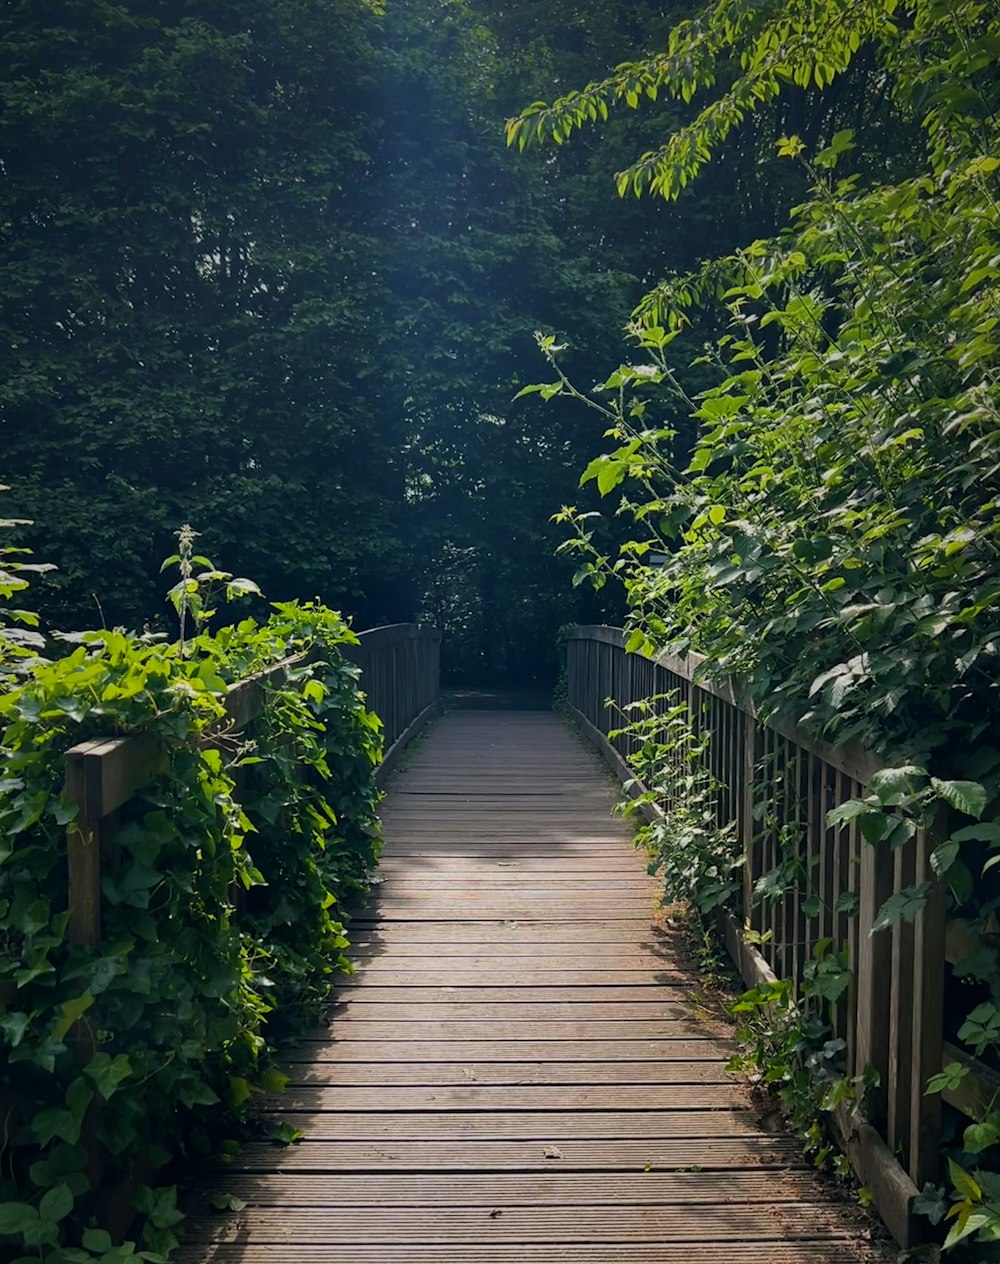 a wooden walkway surrounded by lush green trees